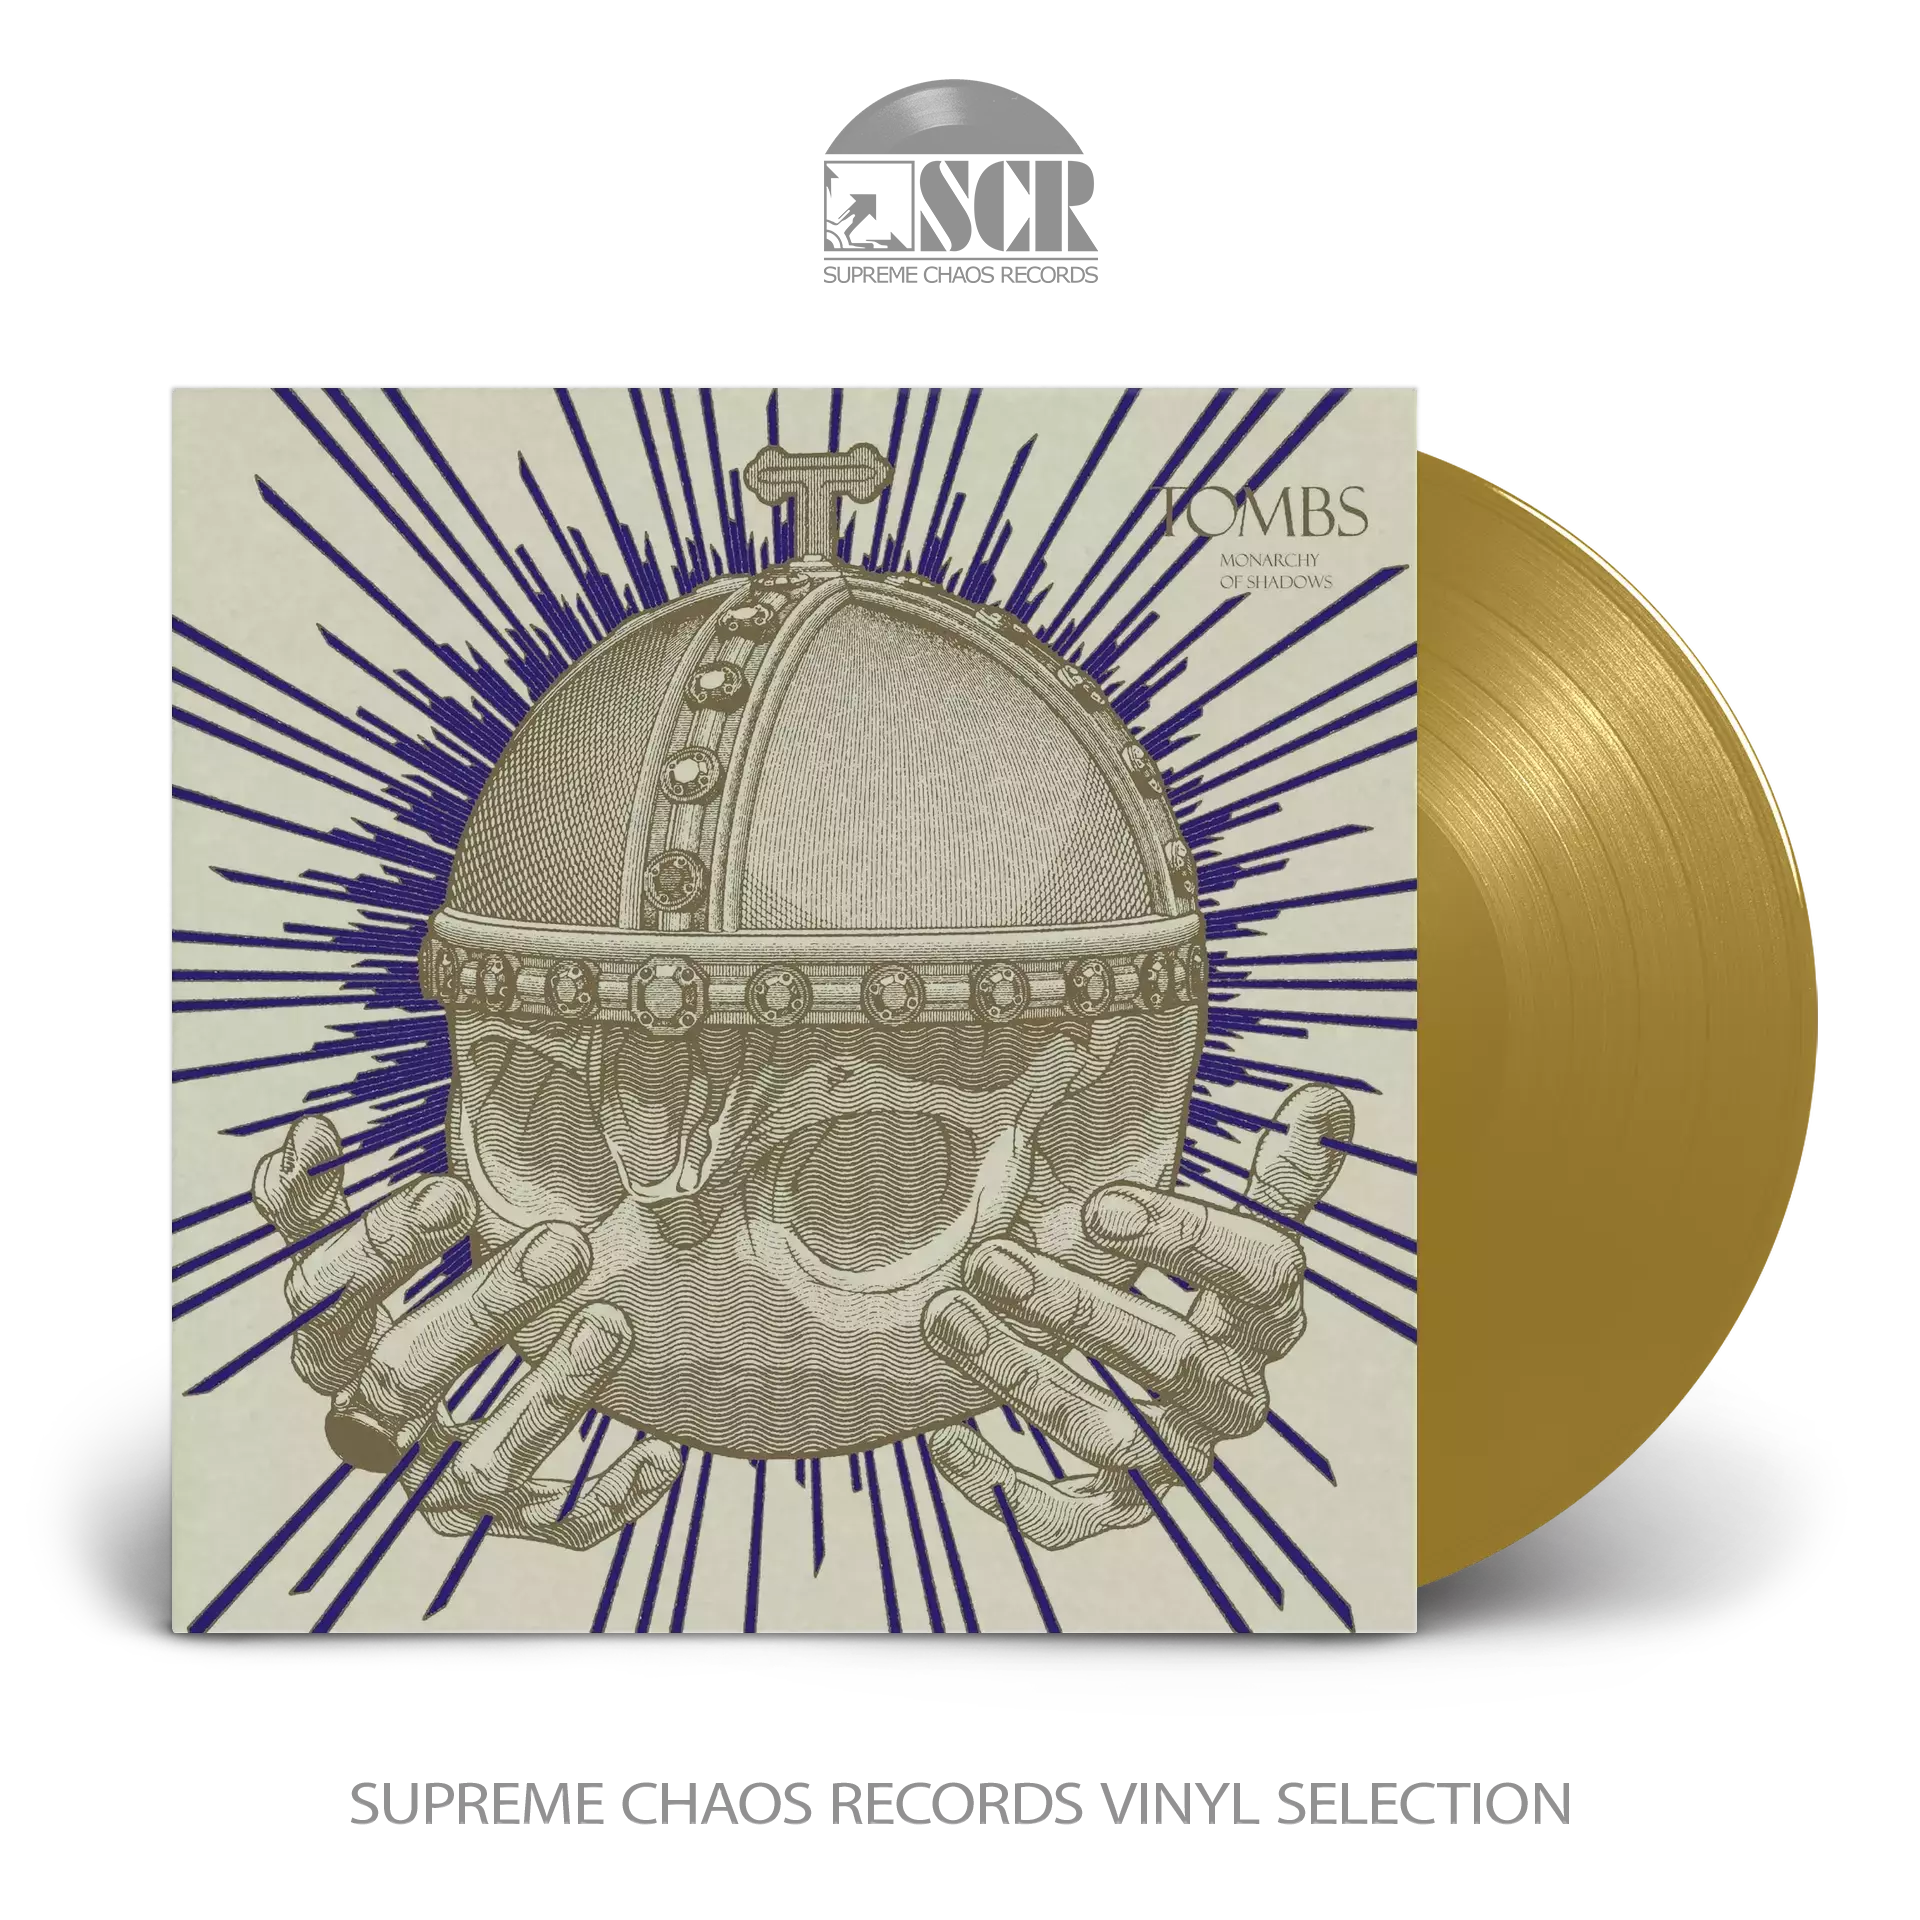 TOMBS - Monarchy Of Shadows [GOLD LP]